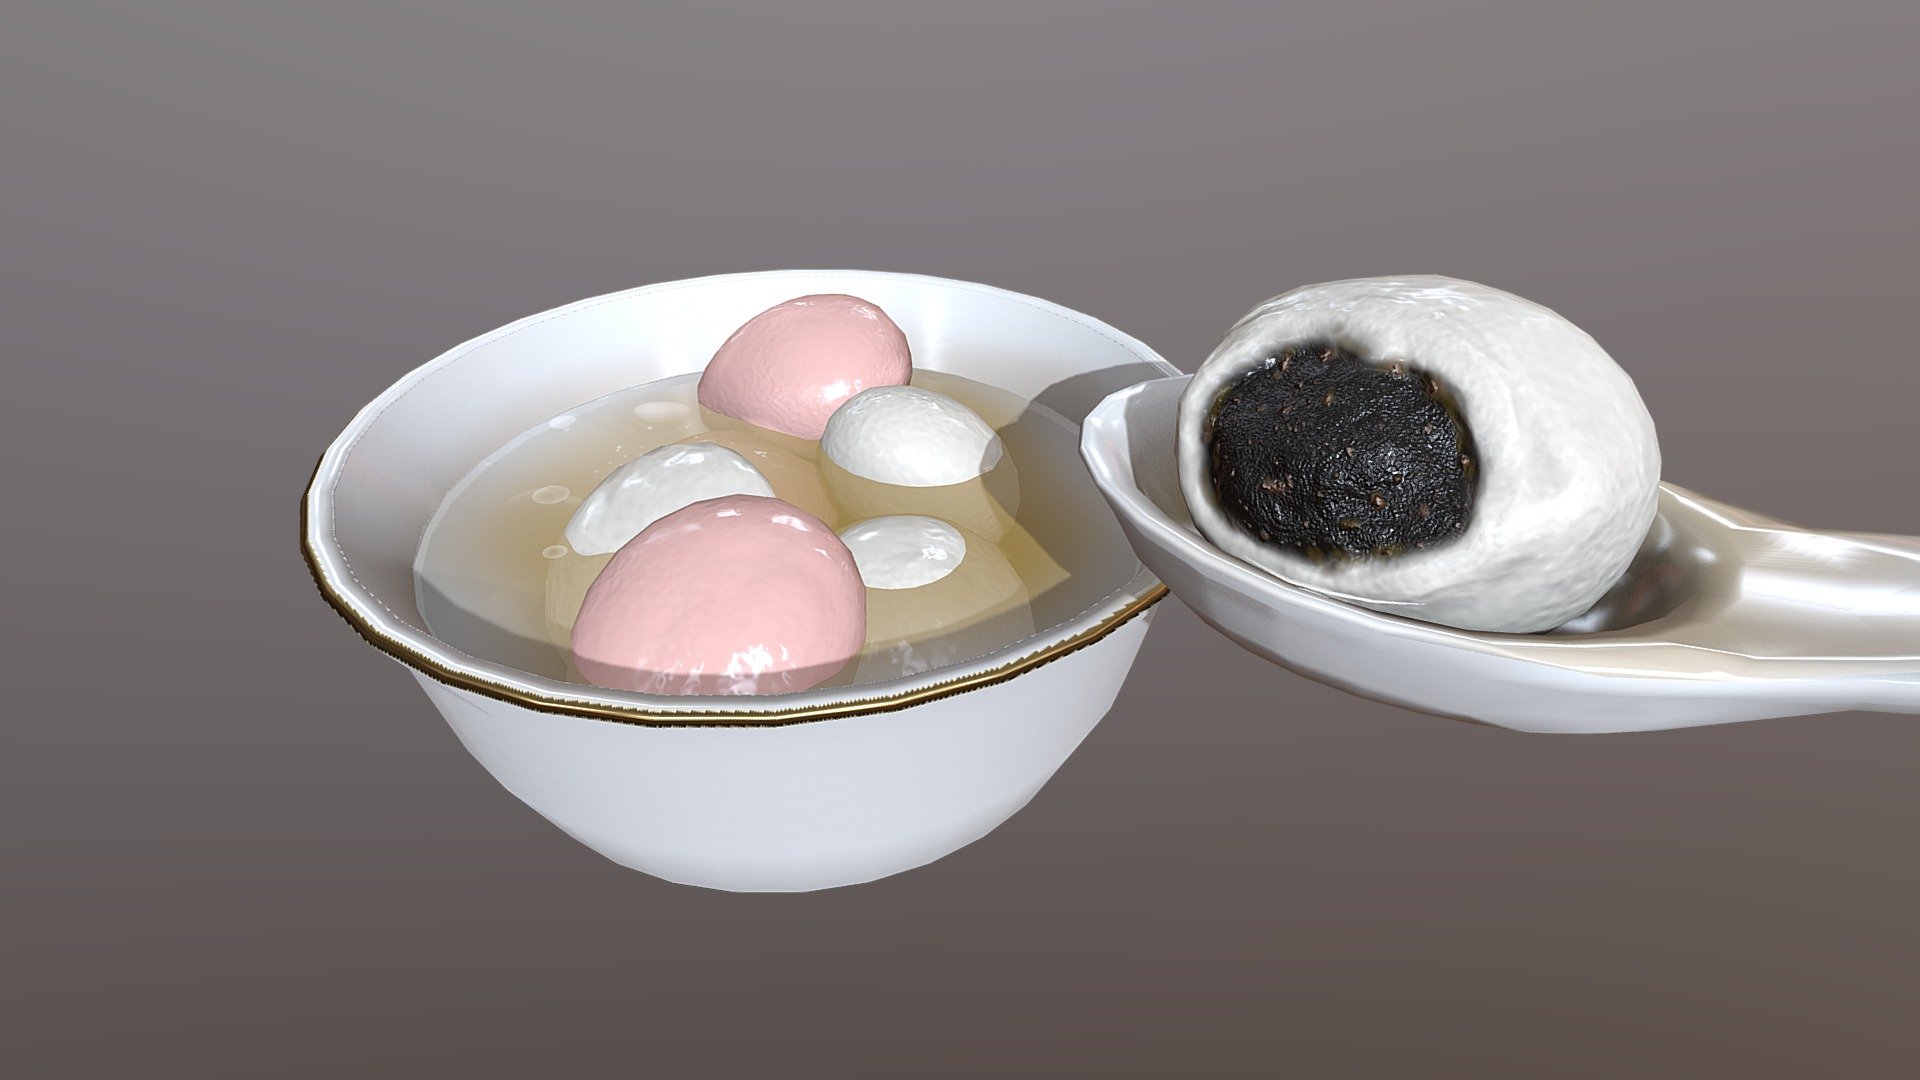 Hi~ It is a Asia food_tangyuan

It has 2355 Polygons and 2217 Vertices.
It can be used in game,VR,AR,CG. 

It have 11 textures(PBR)

tangyuan material: 5textures

2048*2048 size

BaseColor1
Ao1
Metallic1
Normal1
Roughness*1

Transparent_soup material: 6textures

1024*1024 size

BaseColor1
Ao1
Metallic1
Normal1
Roughness1
Opacity1

Display pics use Marmoset Toolbag to render.

I hope you like it~

Thank you.If you have any question , please tell me 3d model